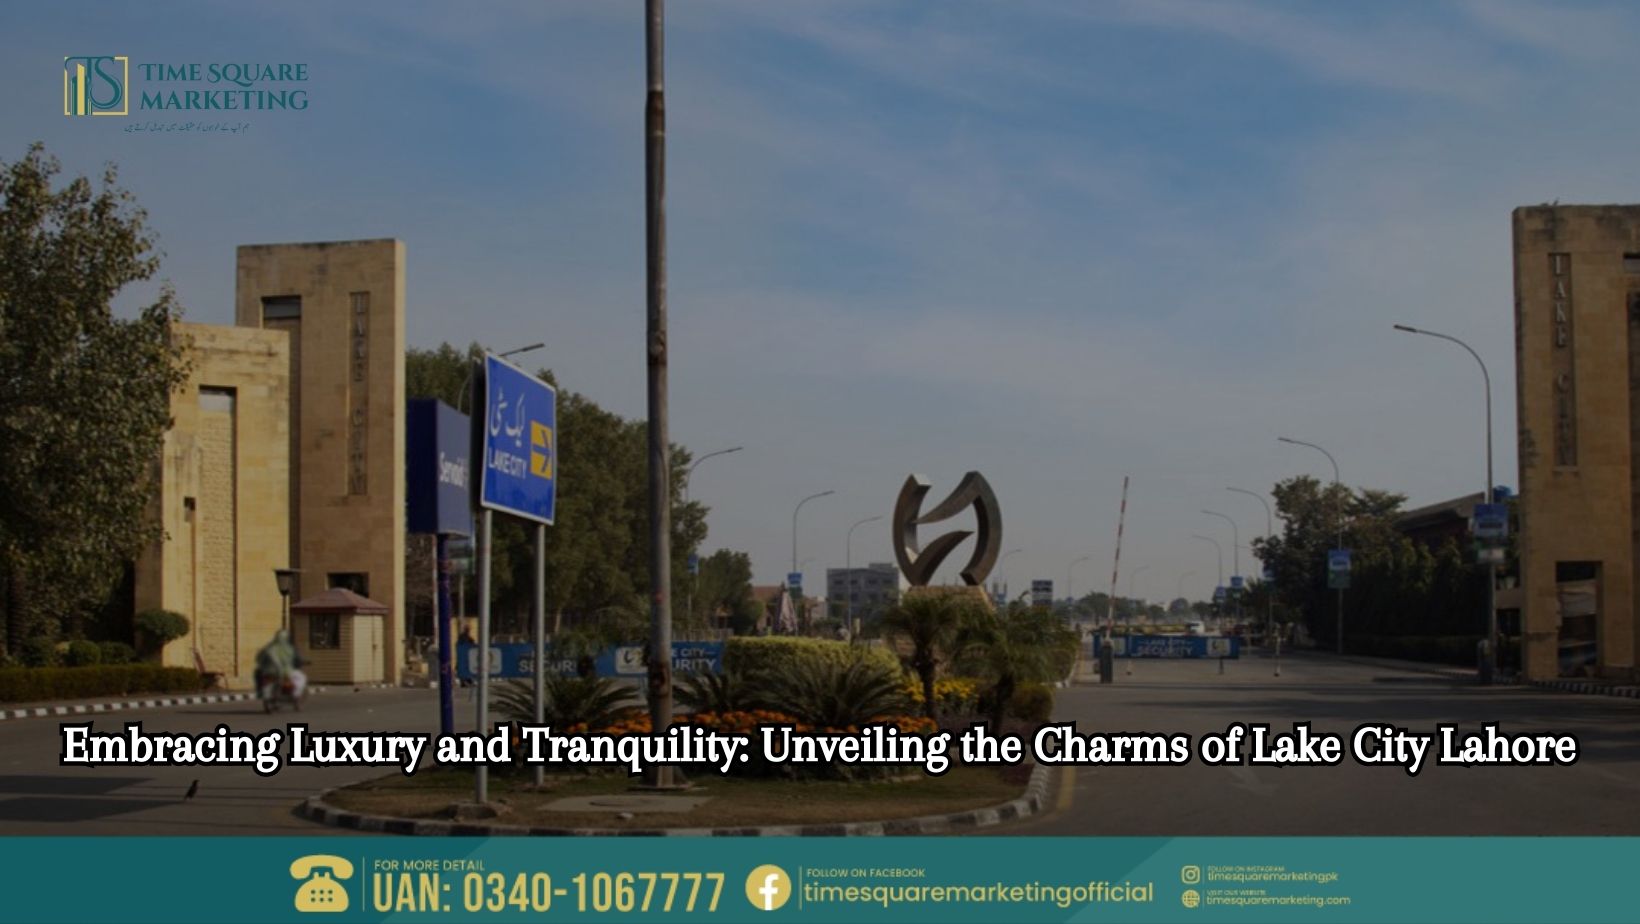 Embracing Luxury and Tranquility Unveiling the Charms of Lake City Lahore